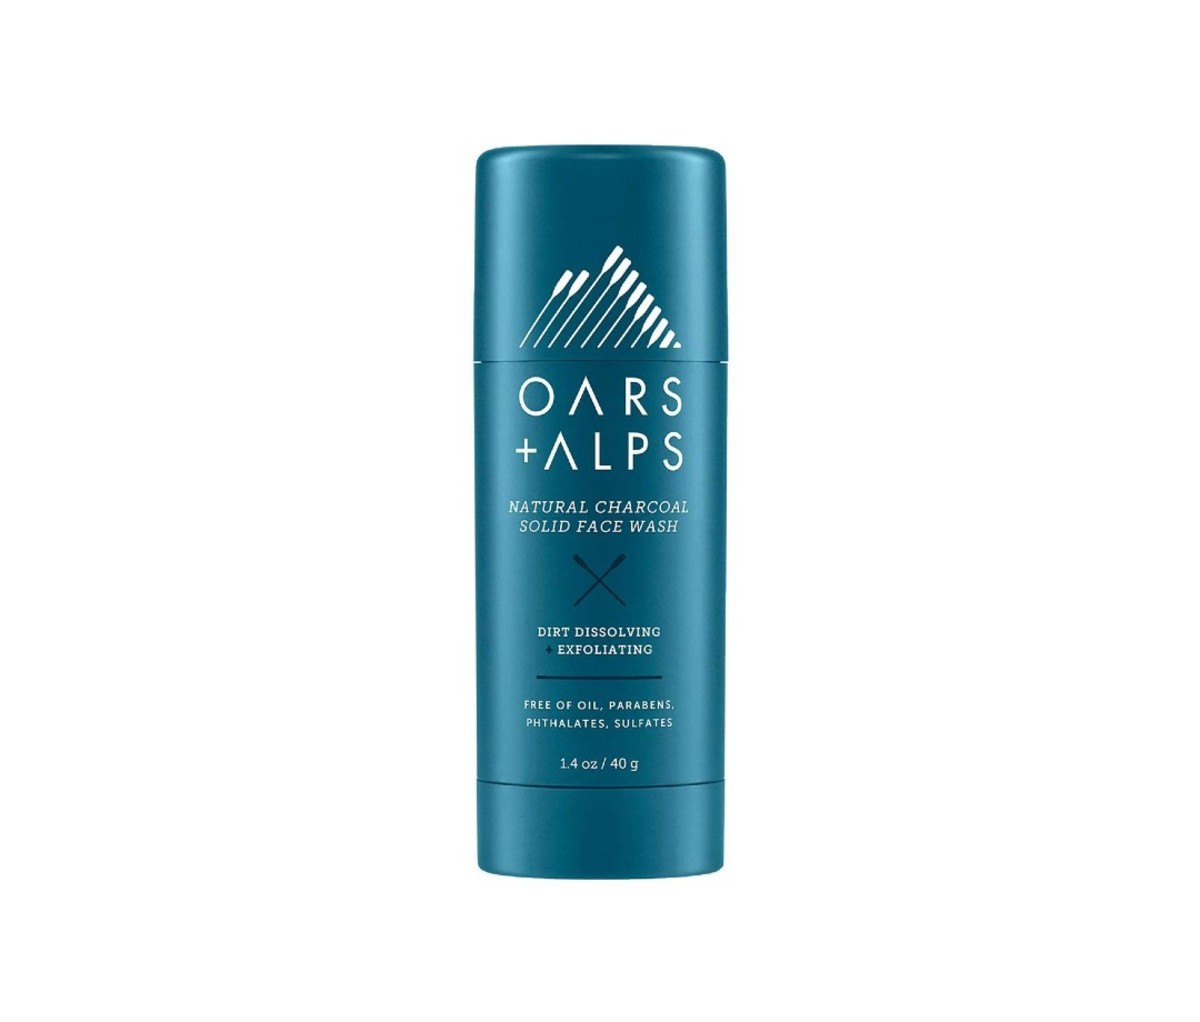 oars and alps exfoliator